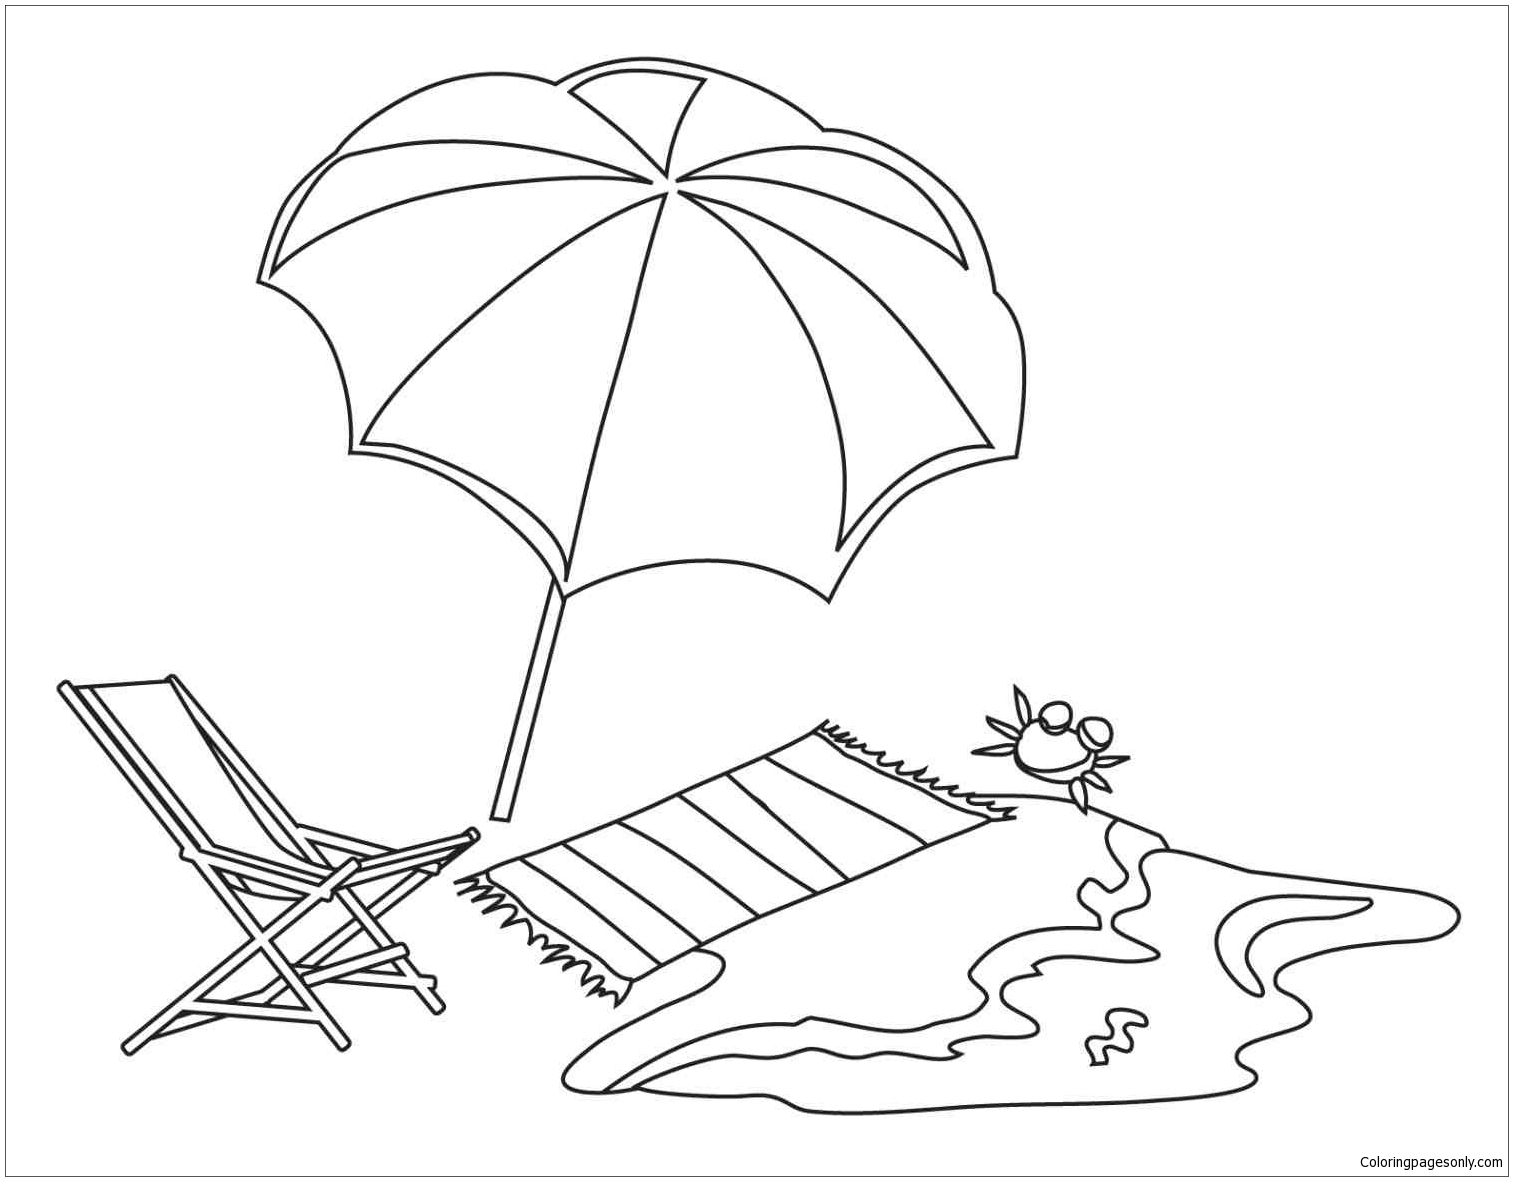 beach-theme-1-coloring-page-free-printable-coloring-pages